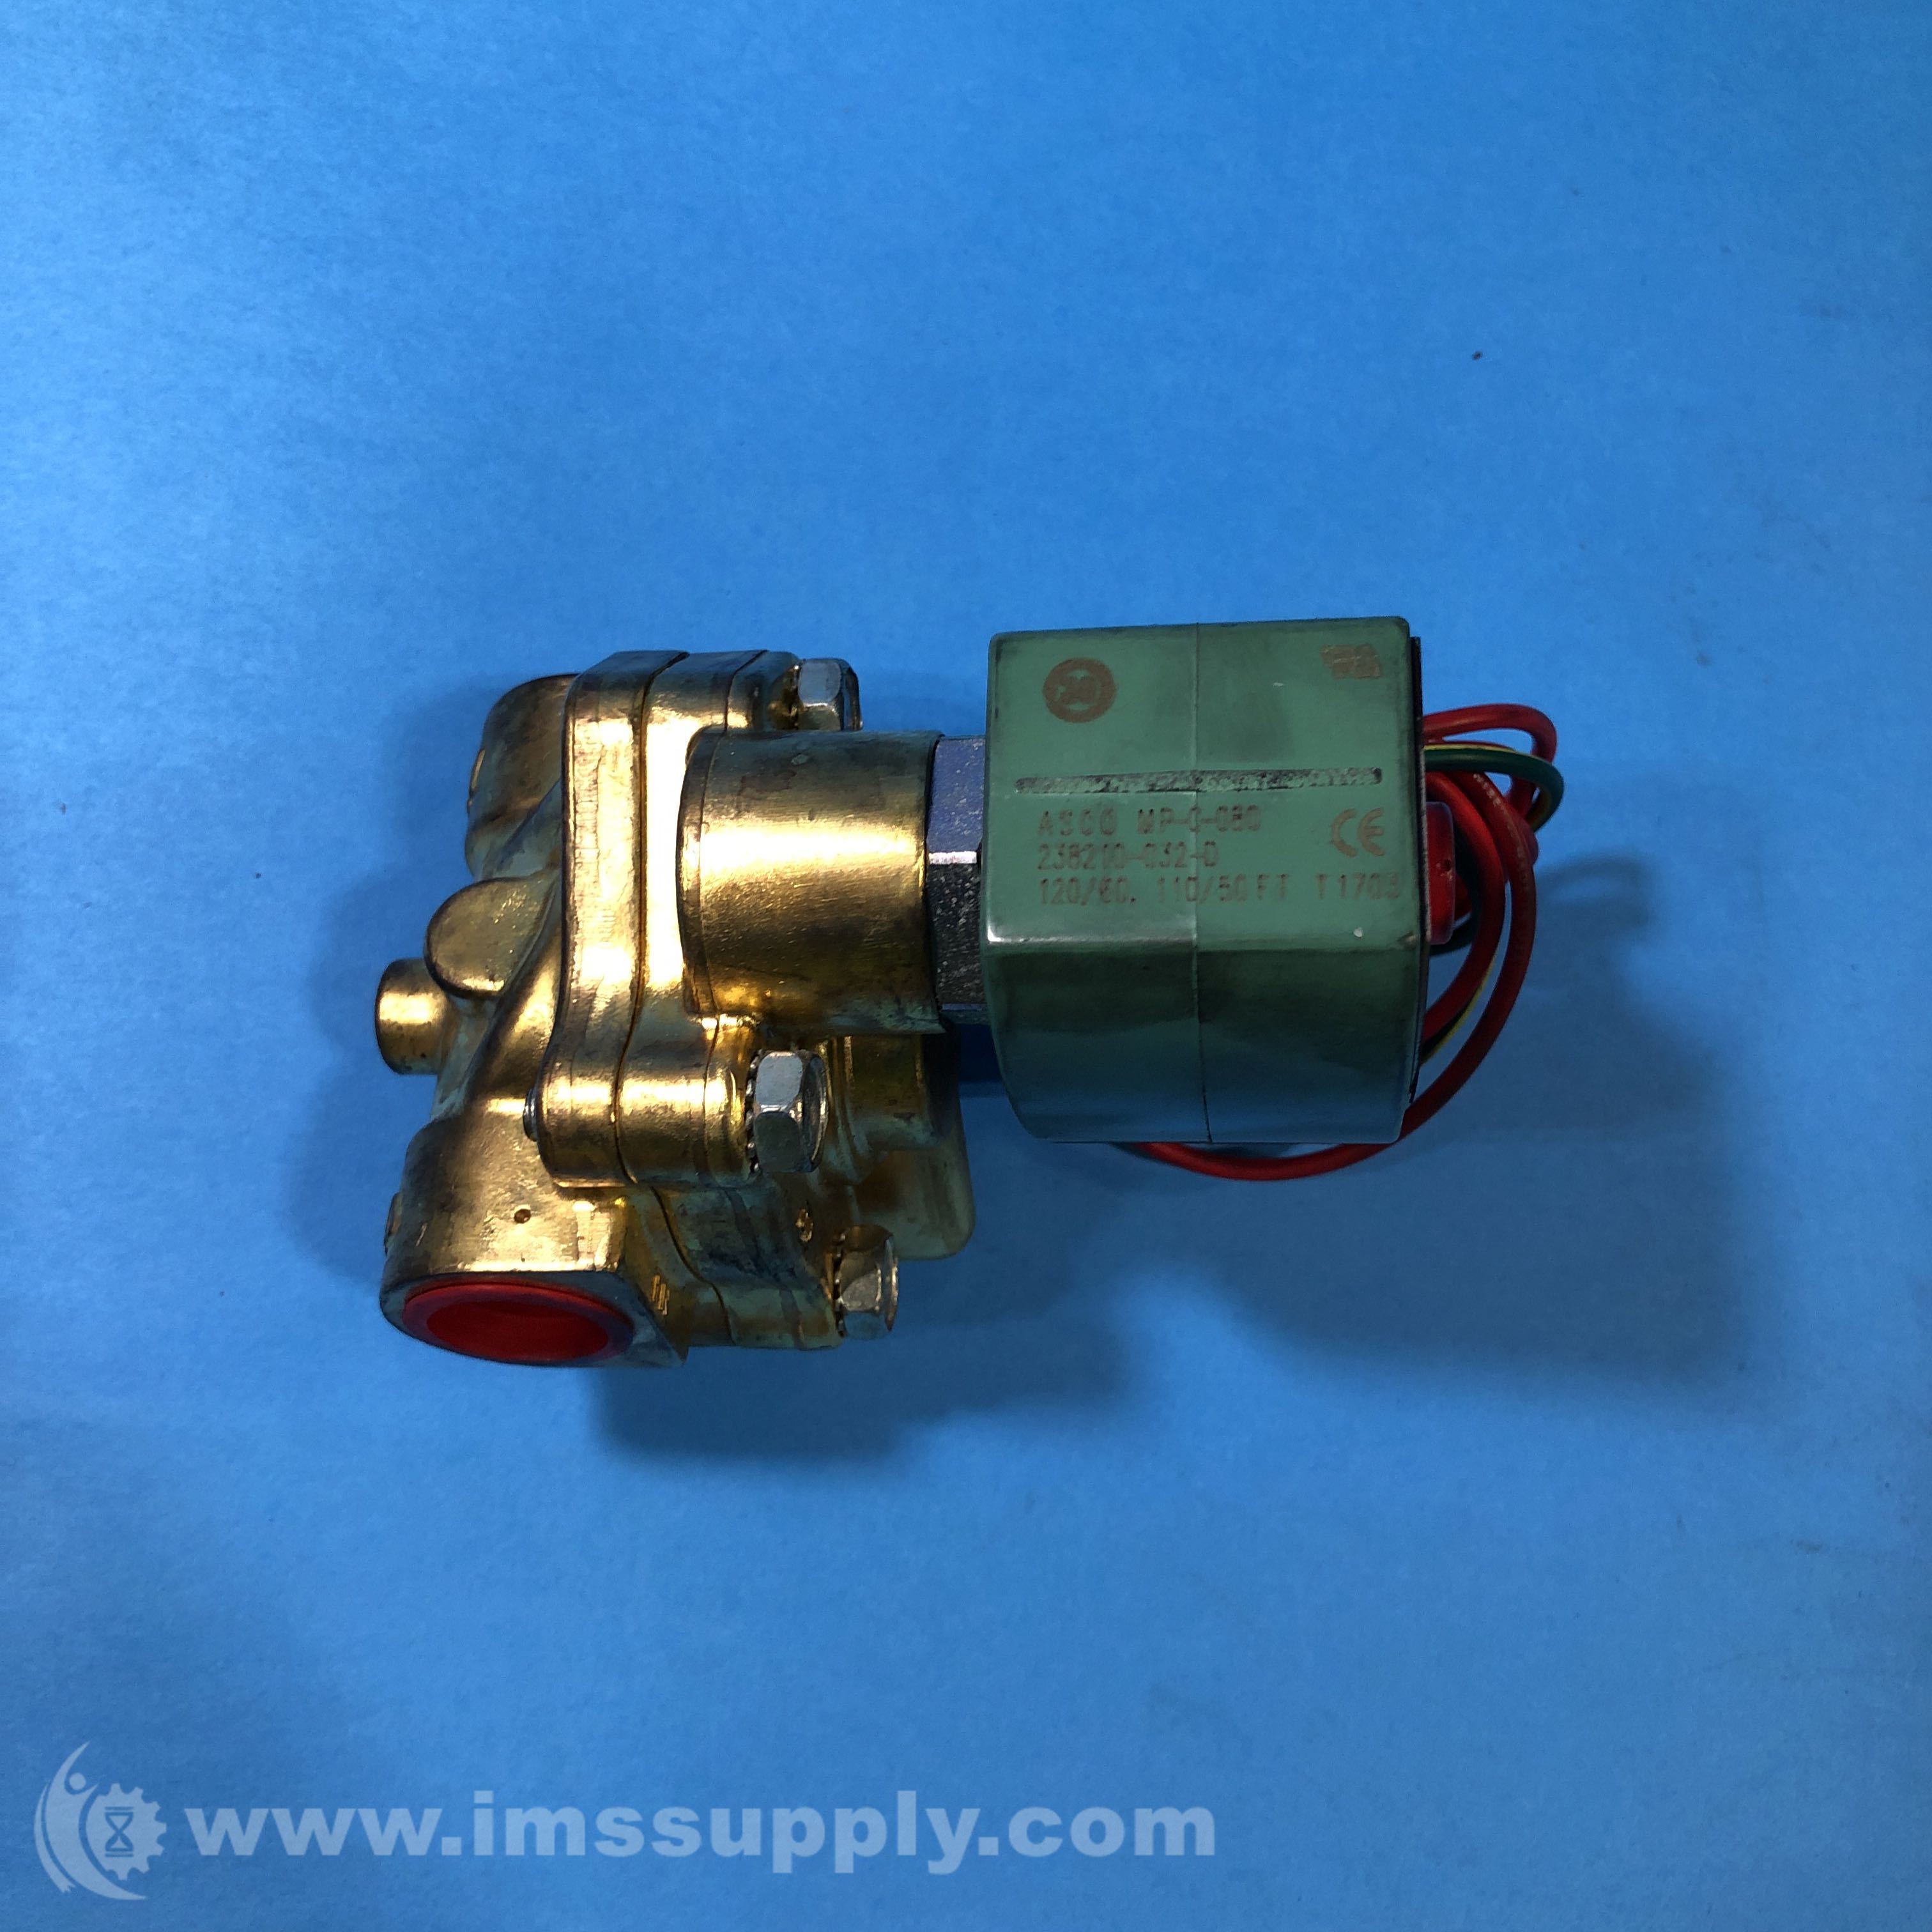 ASCO 8221G005-120 60,110 50 Brass Body Pilot Operated Slow Closing Solenoid Valve, 4" Pipe Size, 2-Way Normally Closed, Nitrile Butylene Sealing,  - 3